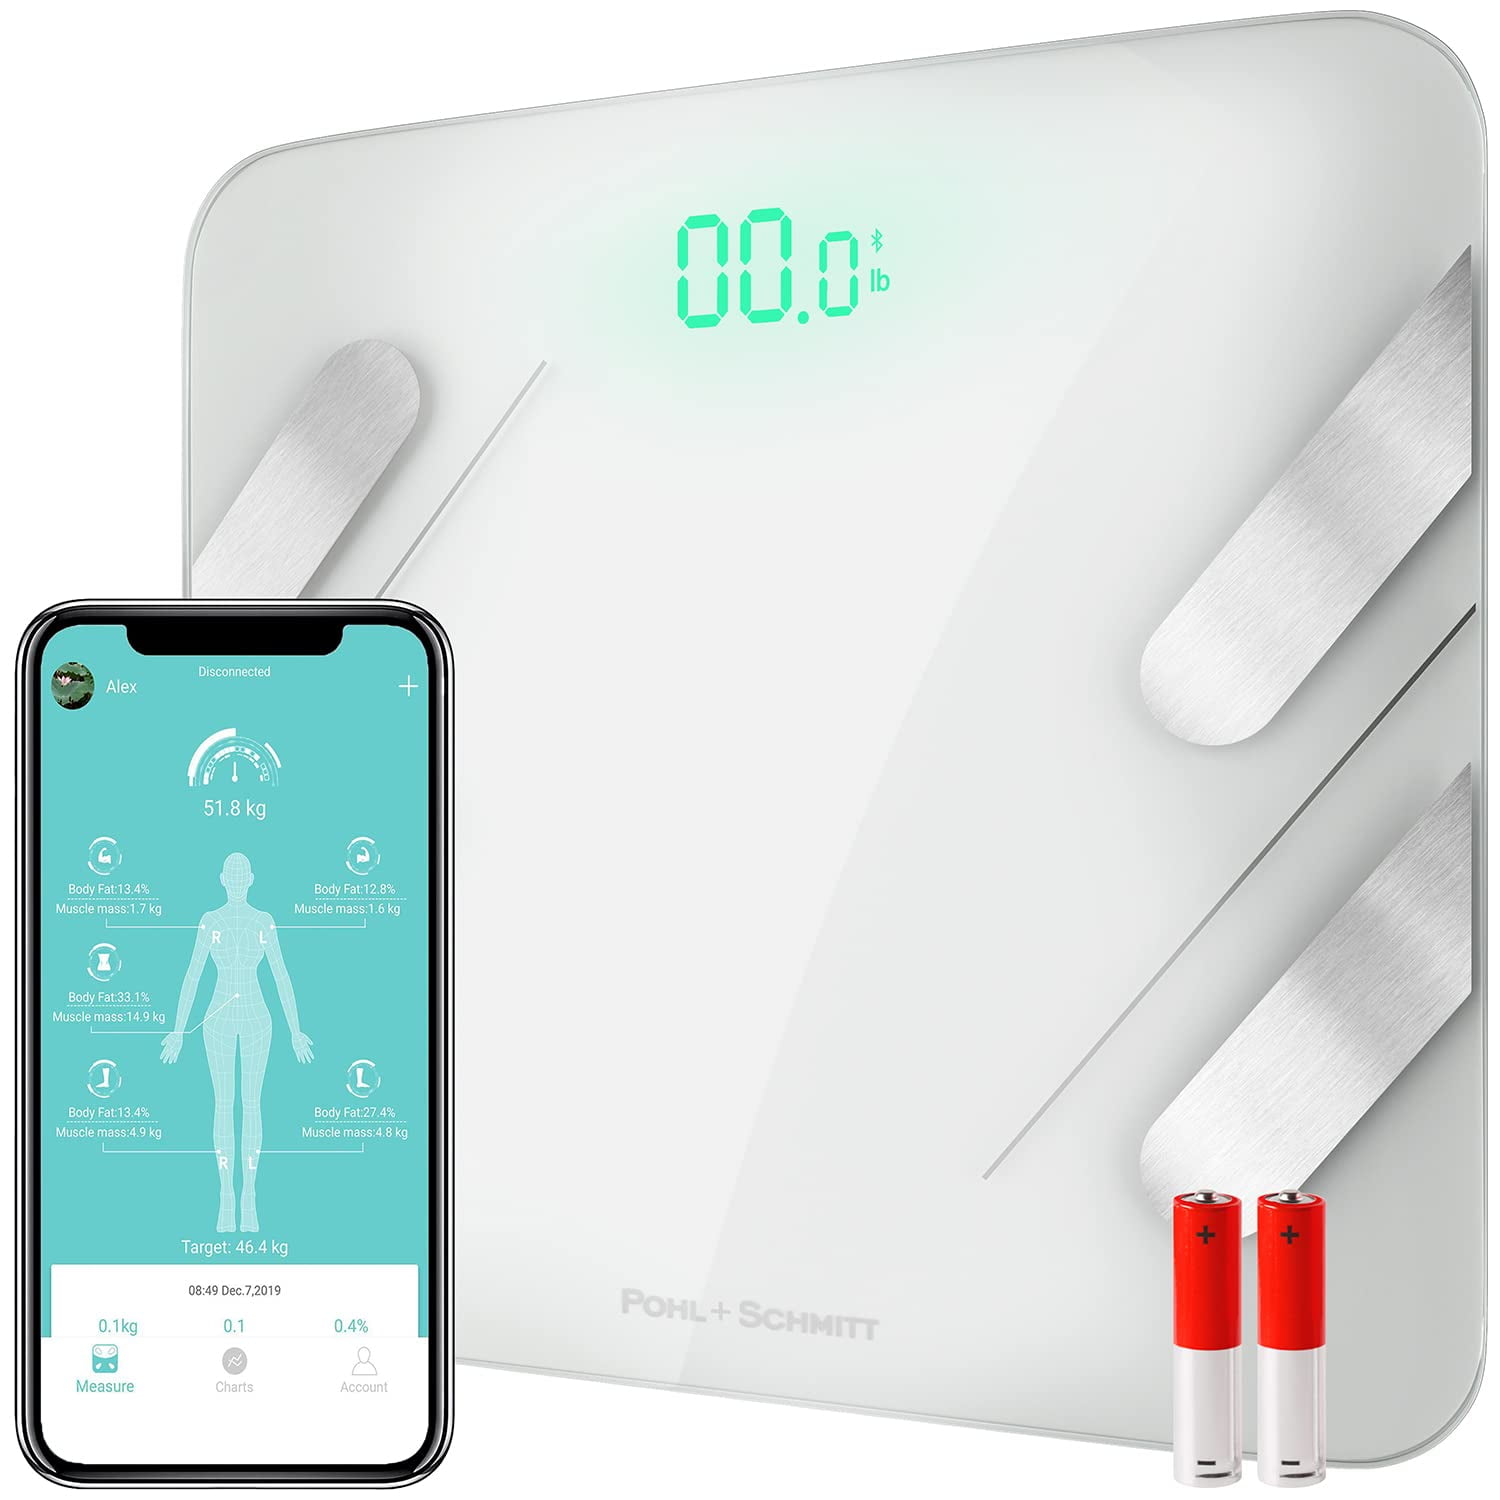 Arboleaf body composition smart scale review - The Gadgeteer